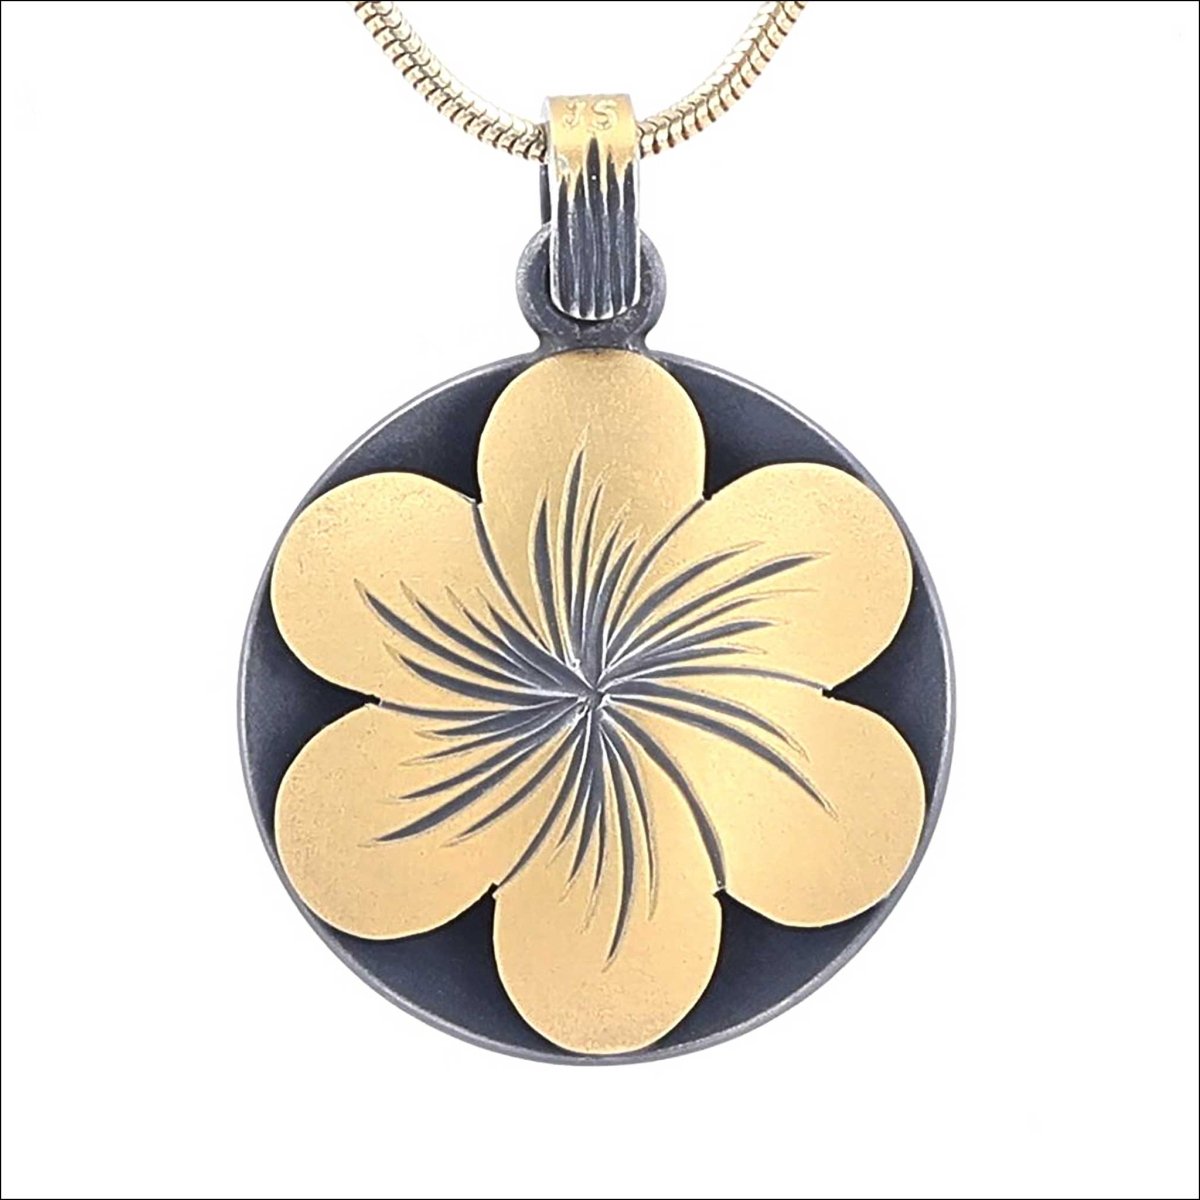 "Eno Collection" Bee and Flower Reversible Hand Engraved Pendant 22KY/Sterling Silver Bimetal - JewelsmithPendants